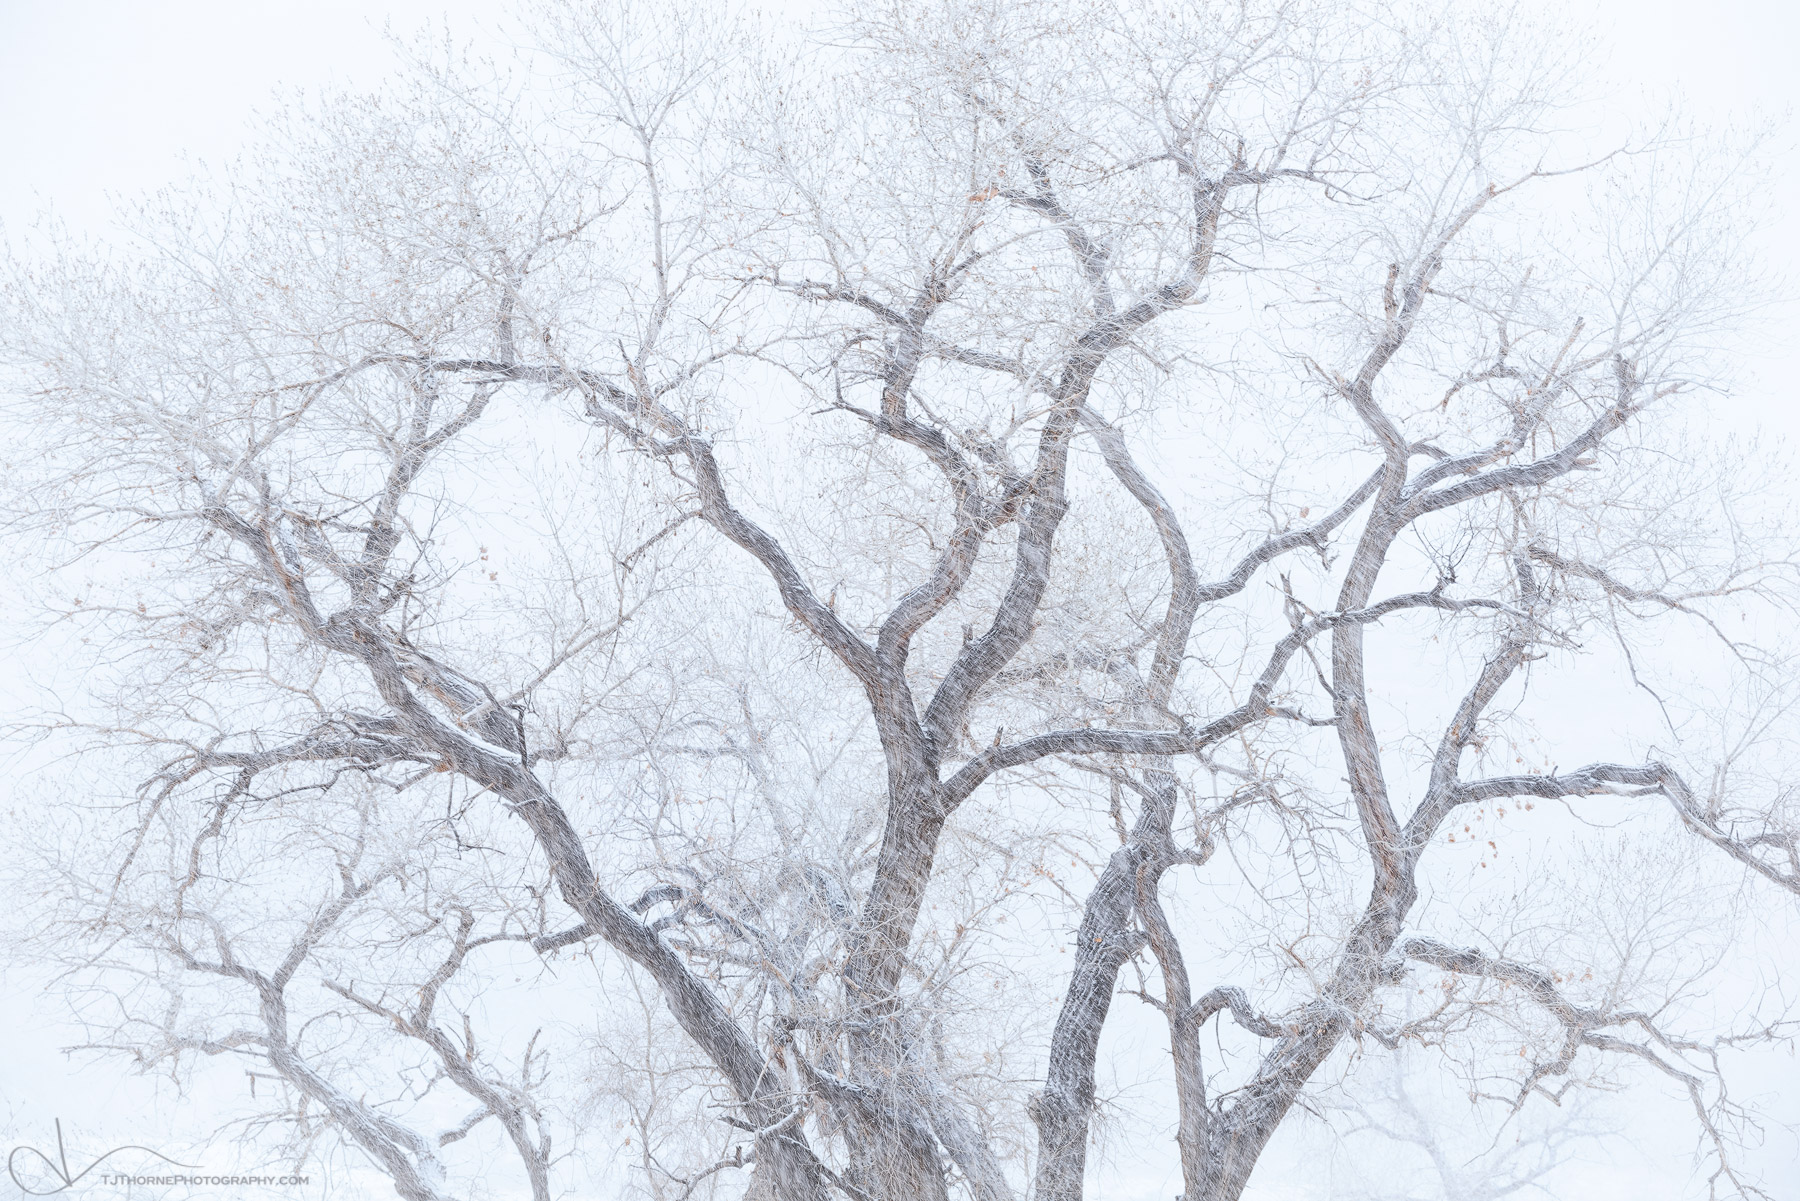 A cottonwood tree in the southern Utah backcountry rides out a heavy winter snowstorm.